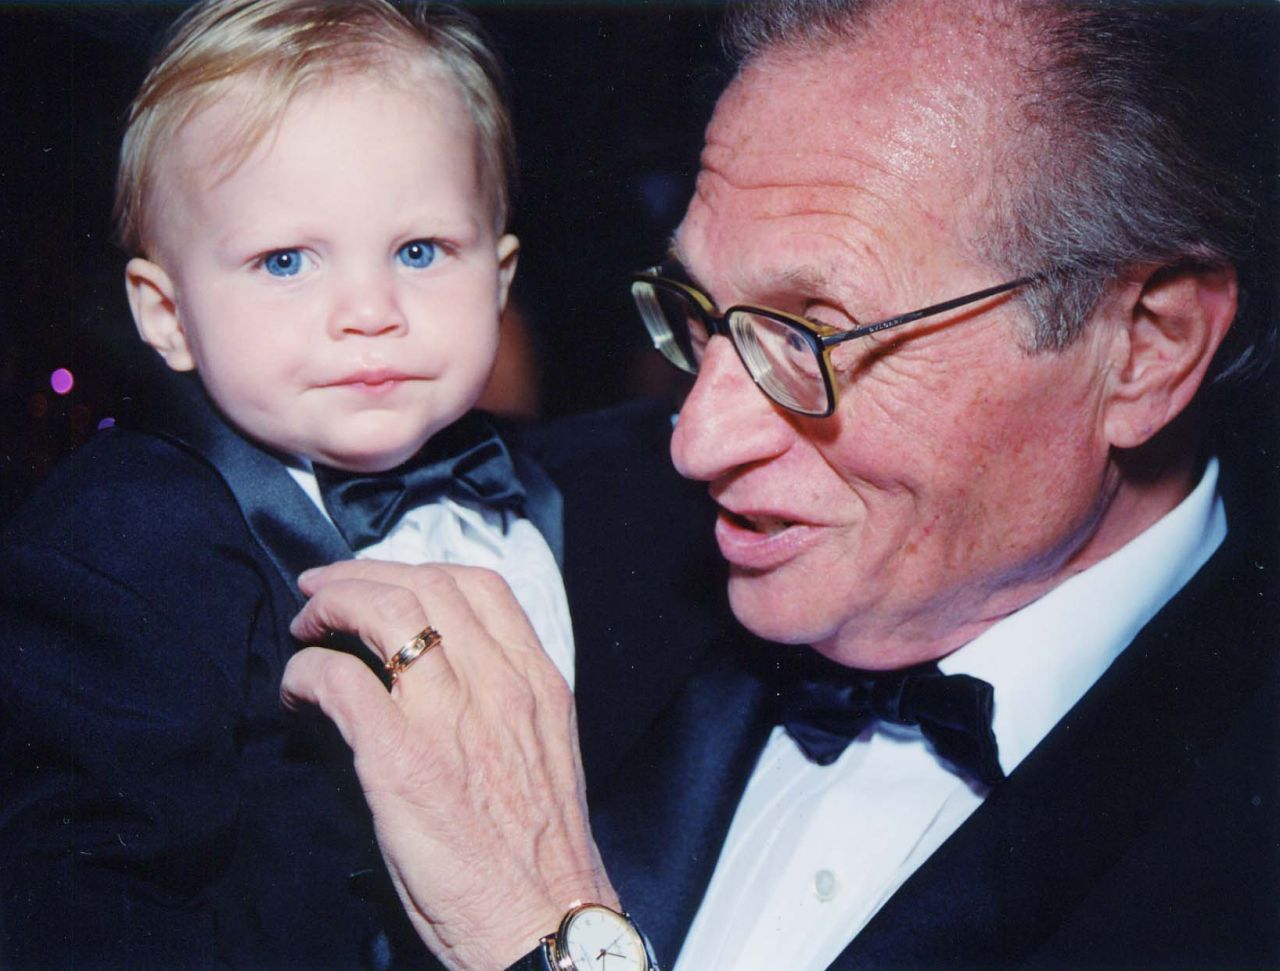 King and his son Chance attend a fundraiser for the Larry King Cardiac Foundation in 2000. Surviving heart problems, including several heart attacks and quintuple bypass surgery in 1987, led King to establish the Larry King Cardiac Foundation to help those without insurance afford medical treatment.